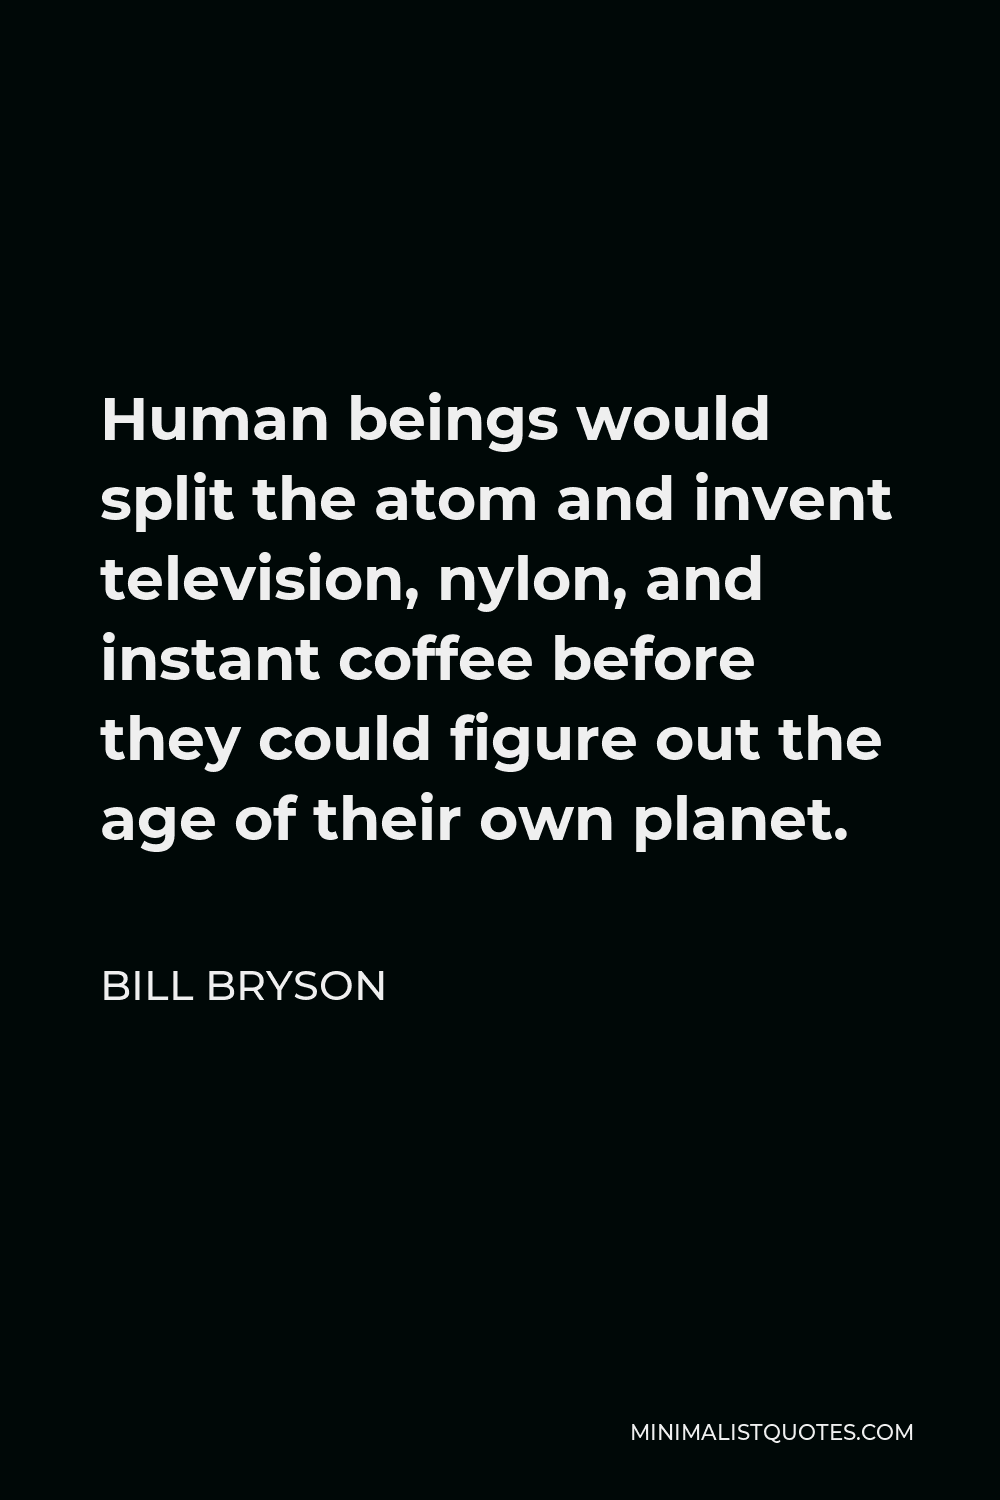 Bill Bryson Quote - Human beings would split the atom and invent television, nylon, and instant coffee before they could figure out the age of their own planet.